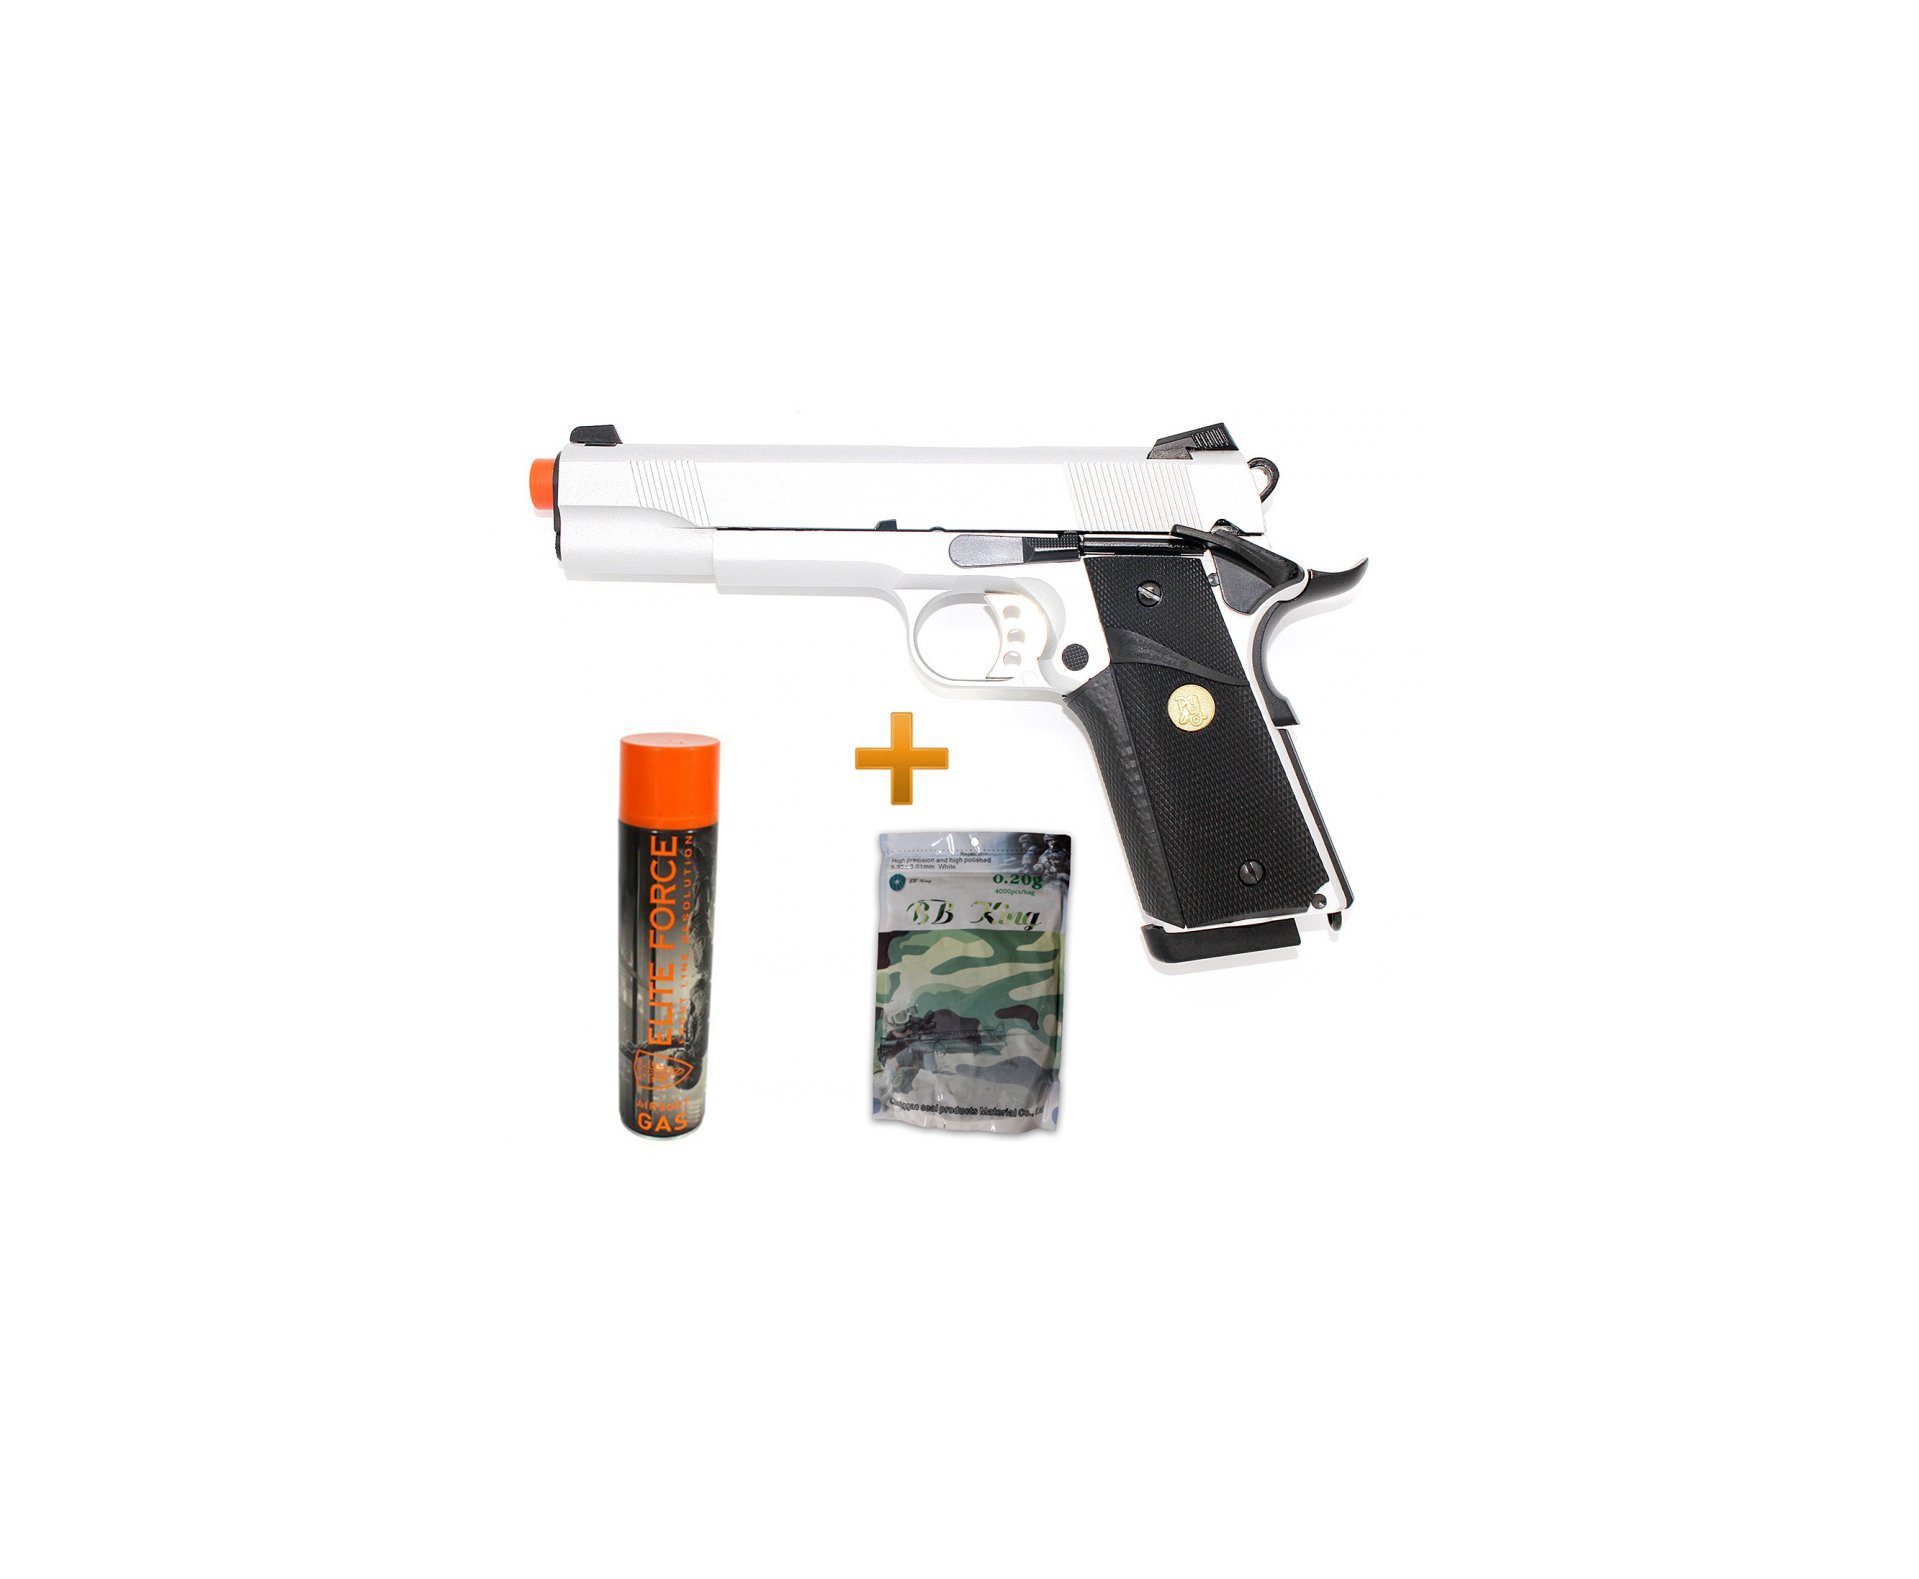 Pistola Airsoft Gas Gbb M1911 Inox Double Bell 728y Blowback 6.0 + Case + Gbb + Bbs 0,20g